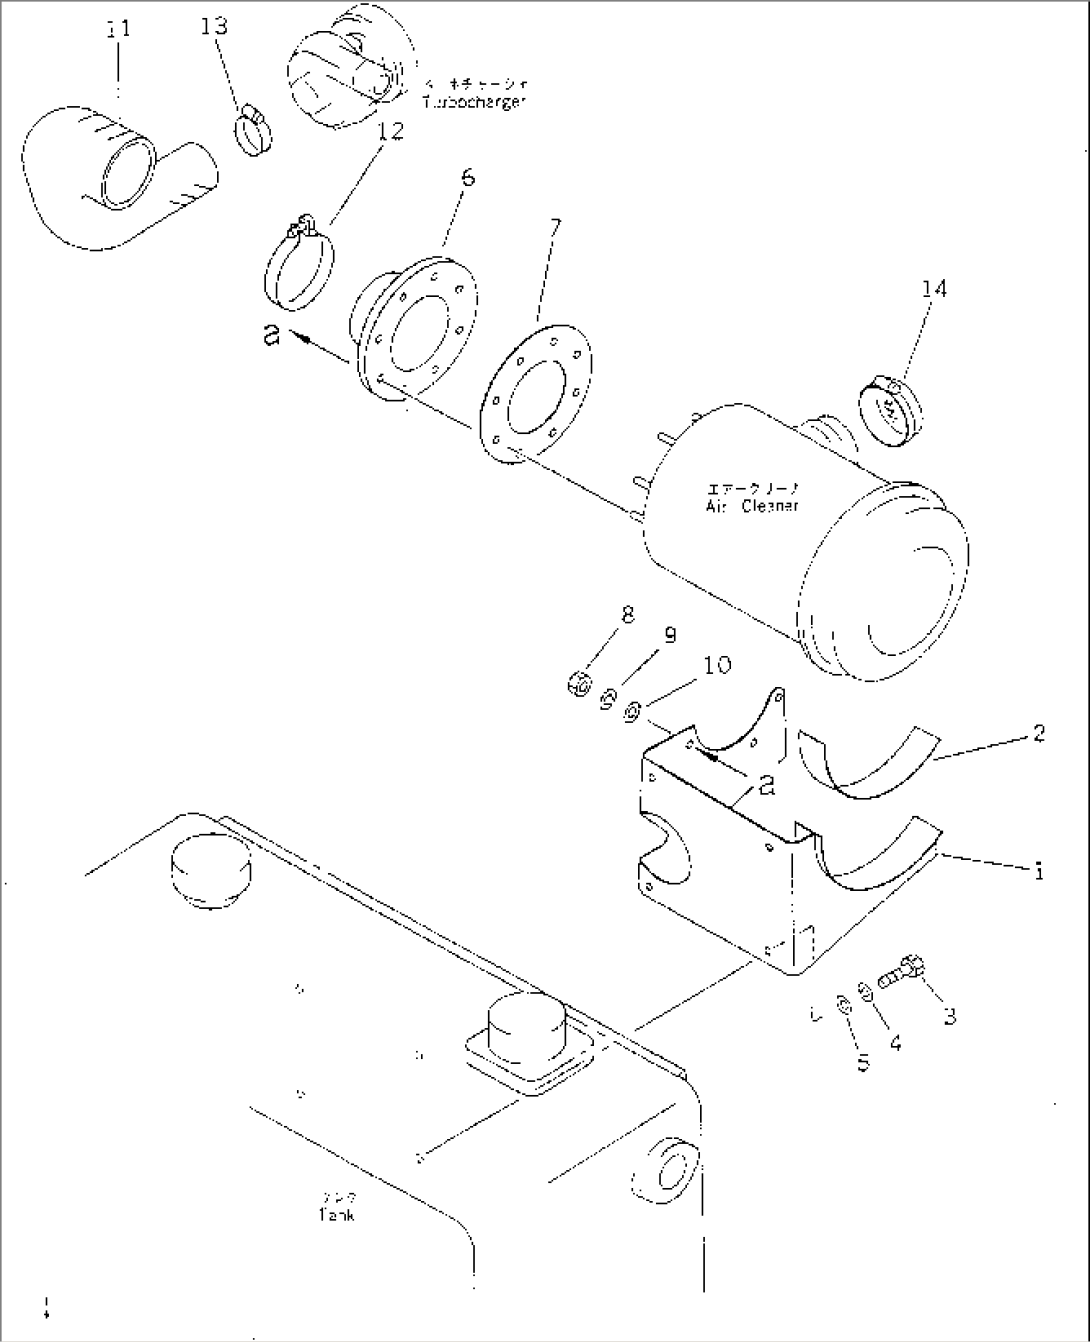 AIR CLEANER CONNECTION(#10001-10002)